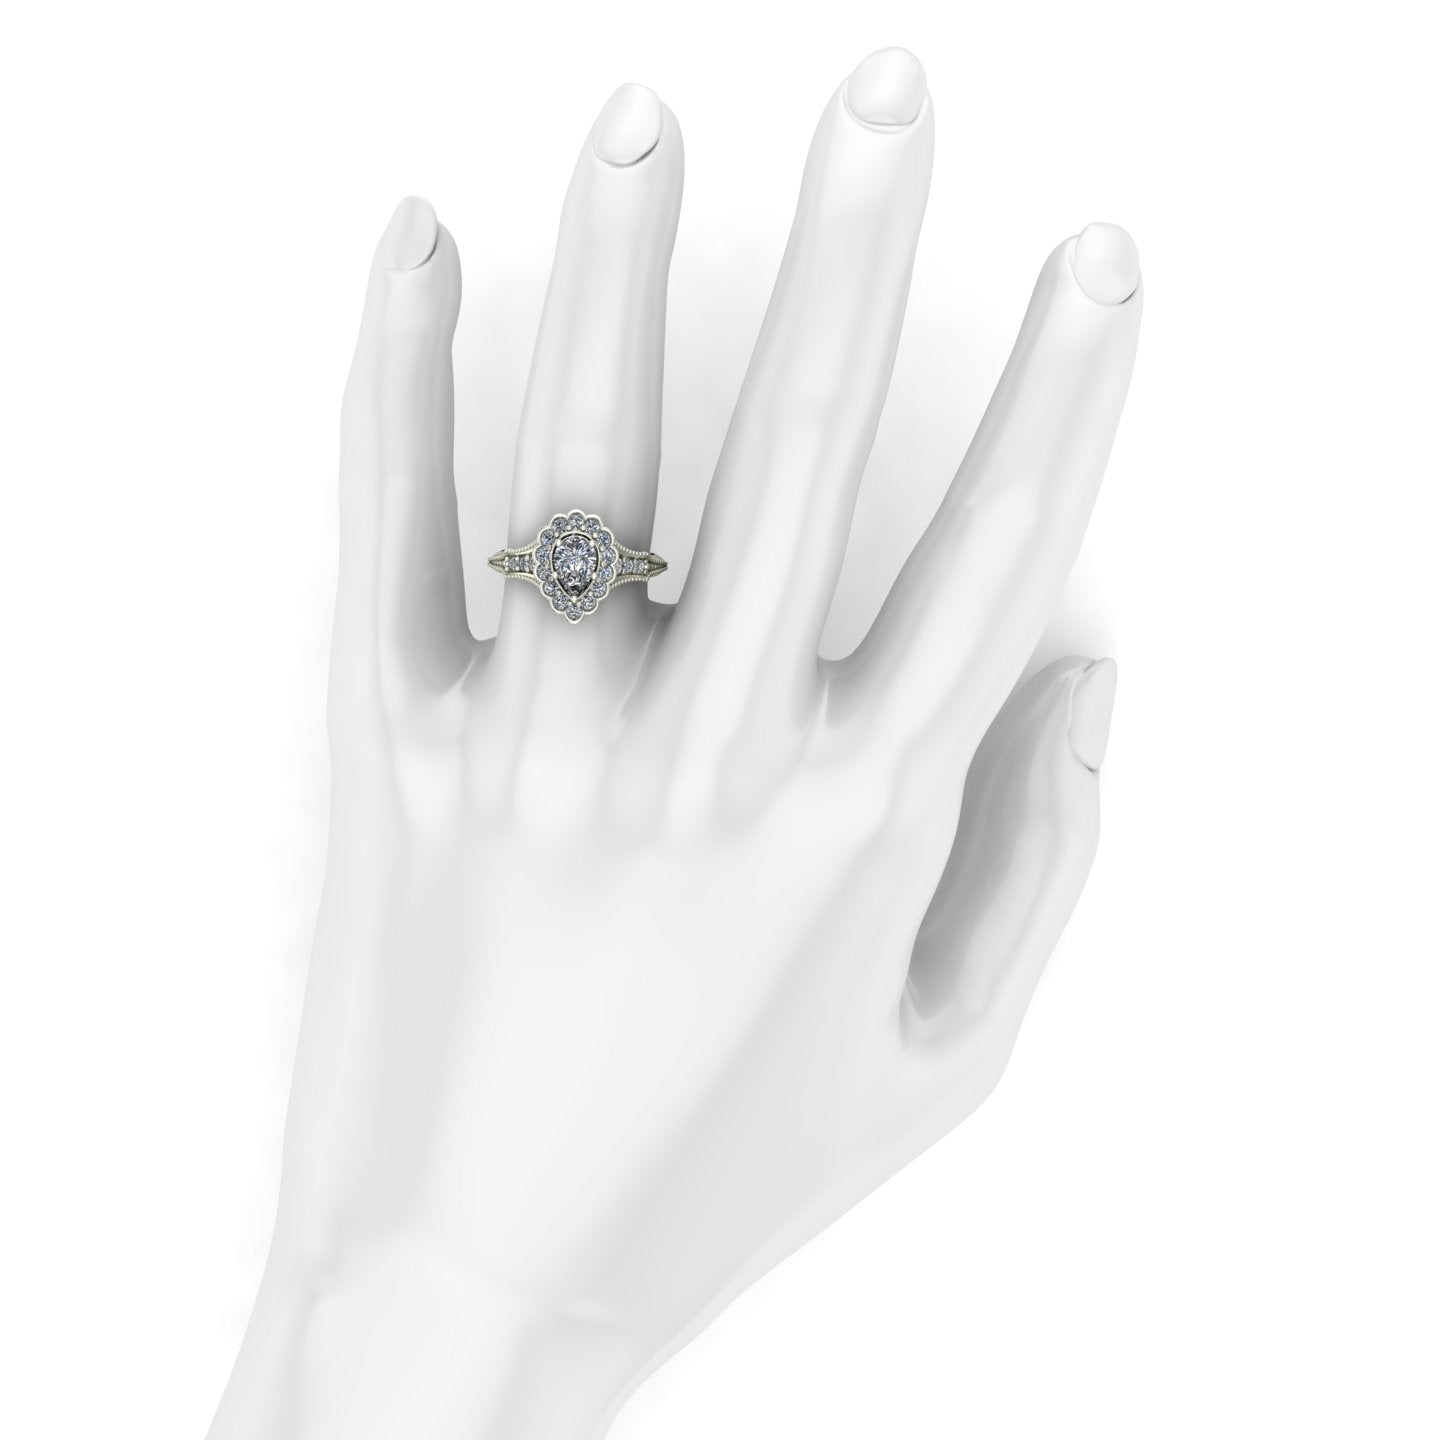 three quarter carat pear cut diamond engagement ring with scallop halo in 18k white gold - Charles Babb Designs - on hand